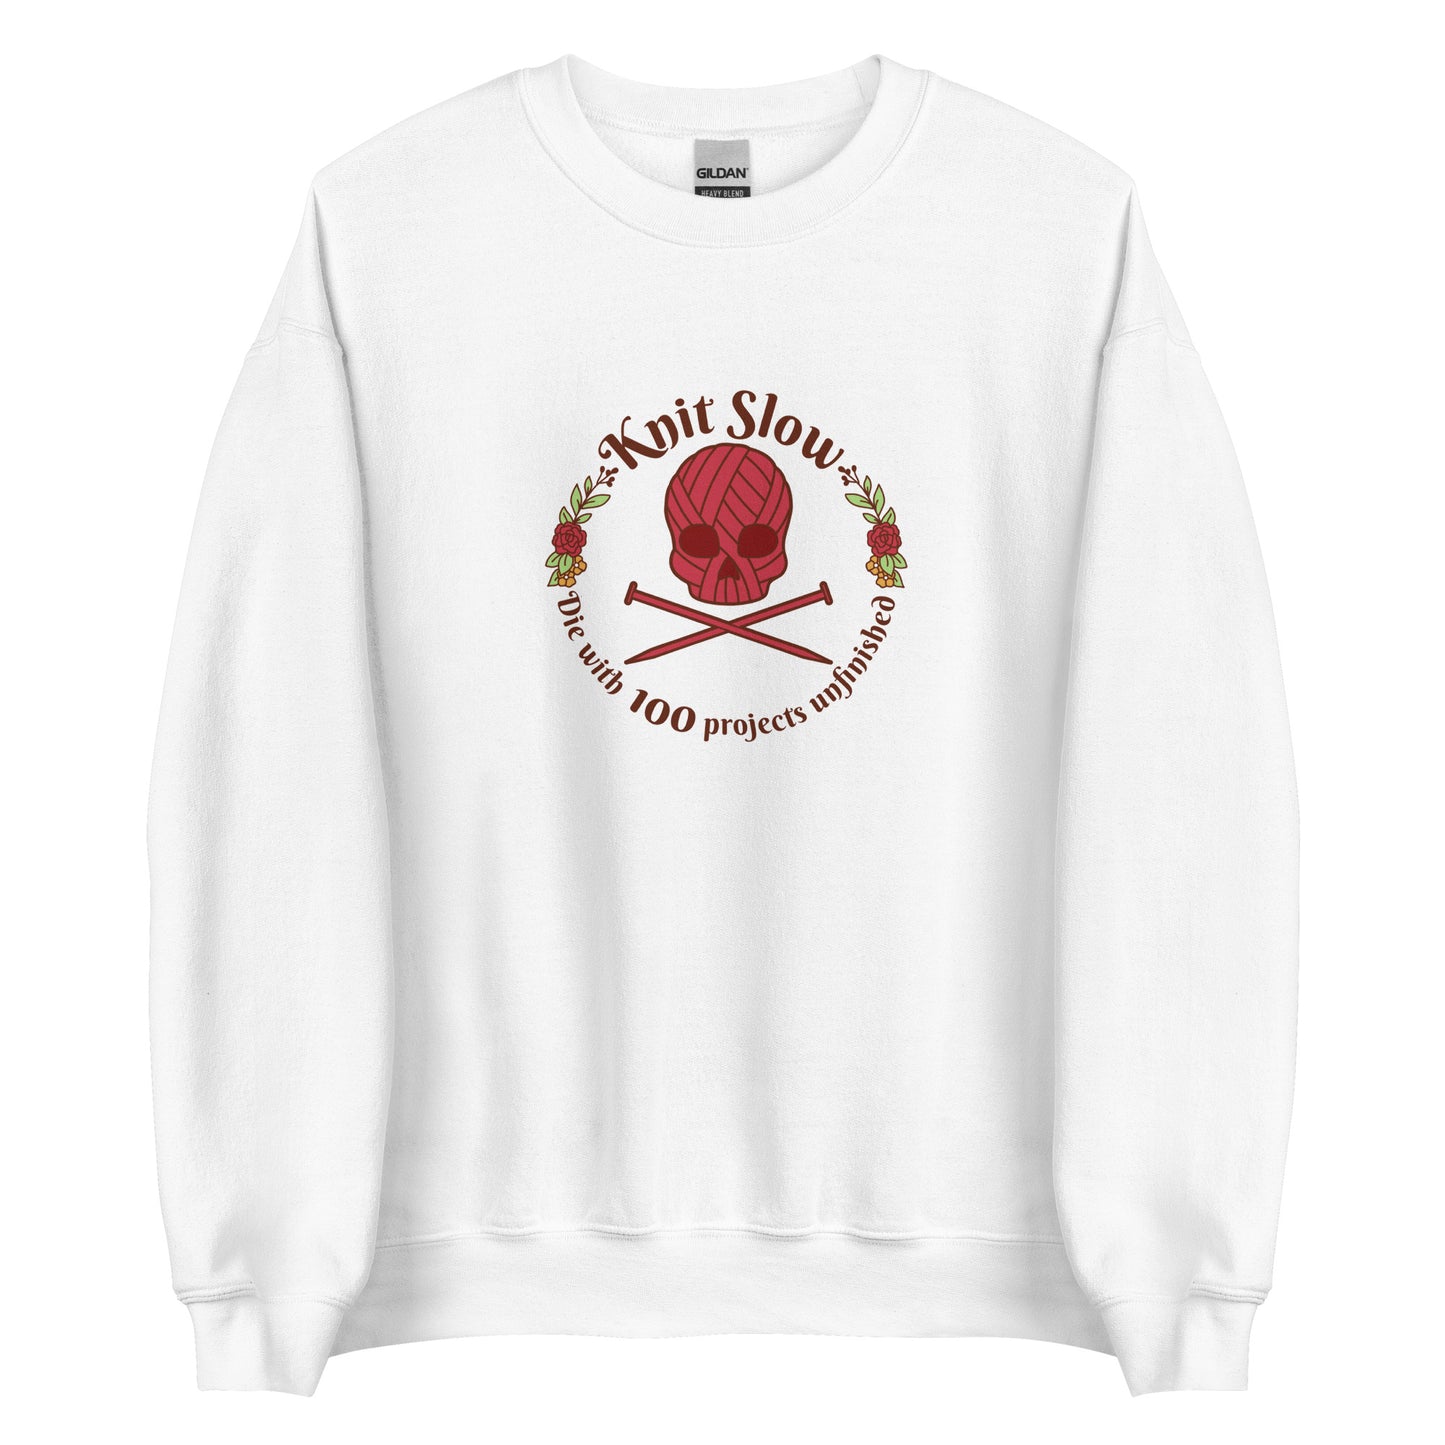 A white crewneck sweatshirt featuring an image of a skull and crossbones made of yarn and knitting needles. A floral wreath surrounds the skull, along with words that read "Knit Slow, Die with 100 projects unfinished"